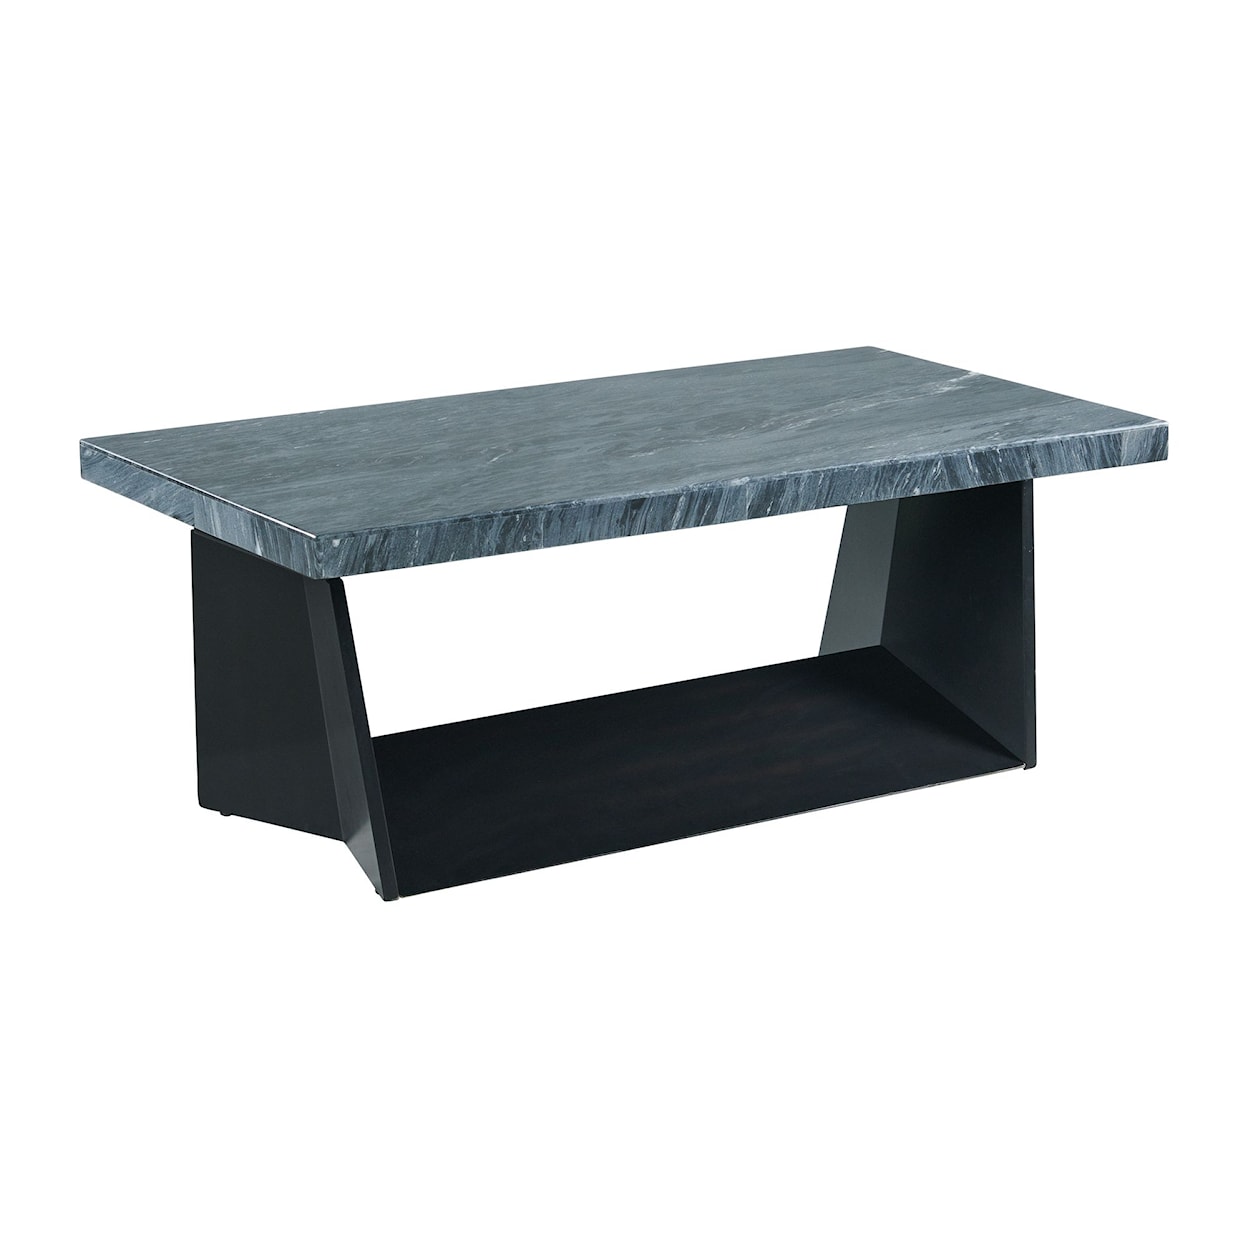 Elements International Beckley Coffee Table